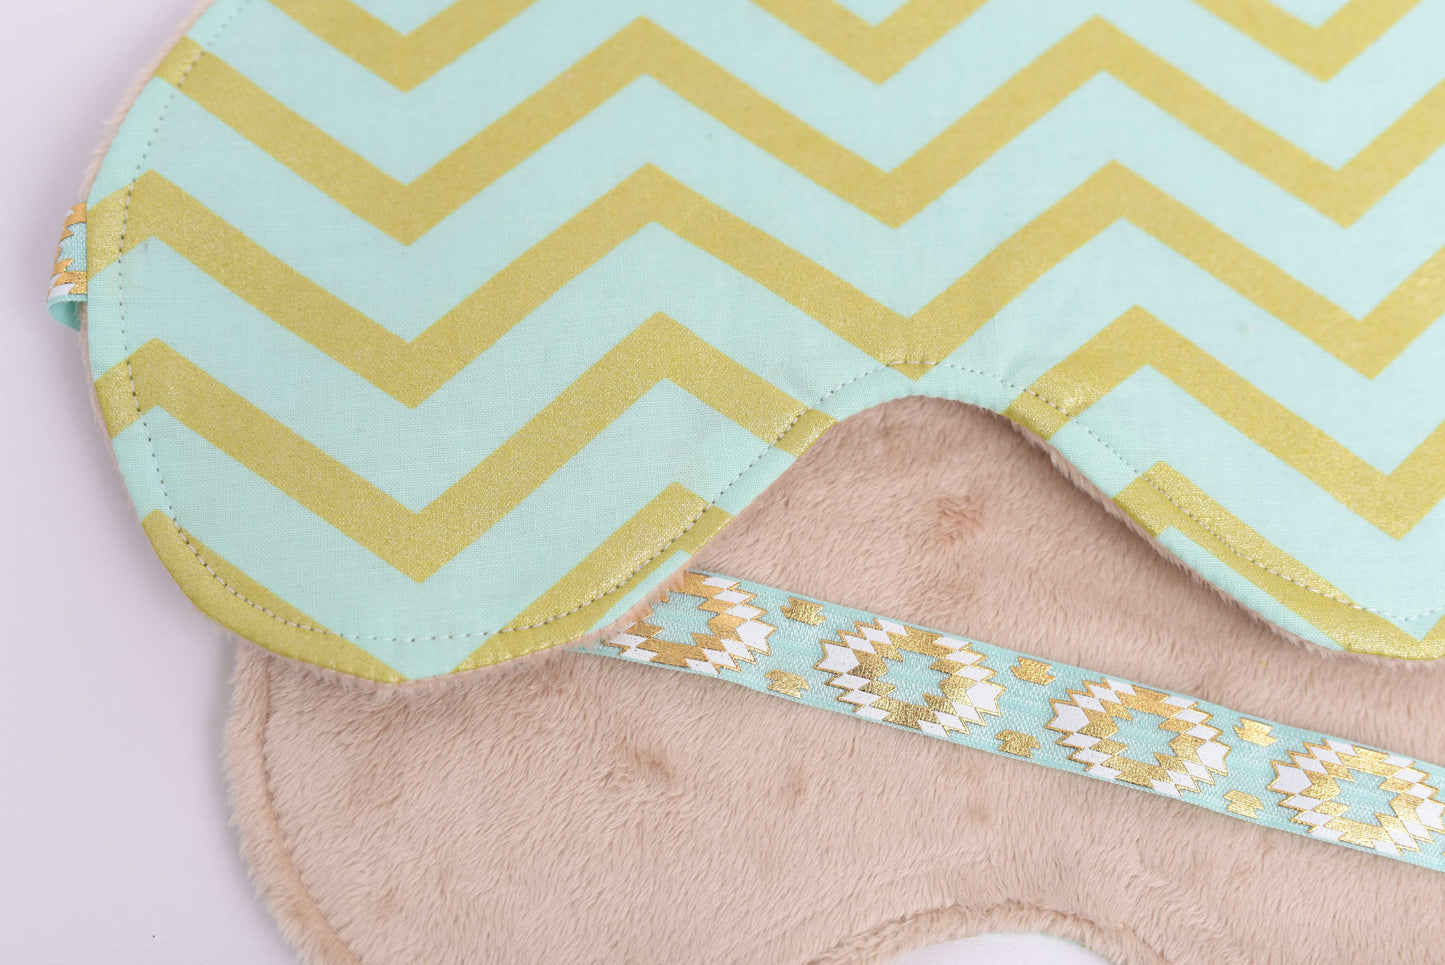 Mint and Gold Chevron Womens Sleep Mask with Soft Minky Backing